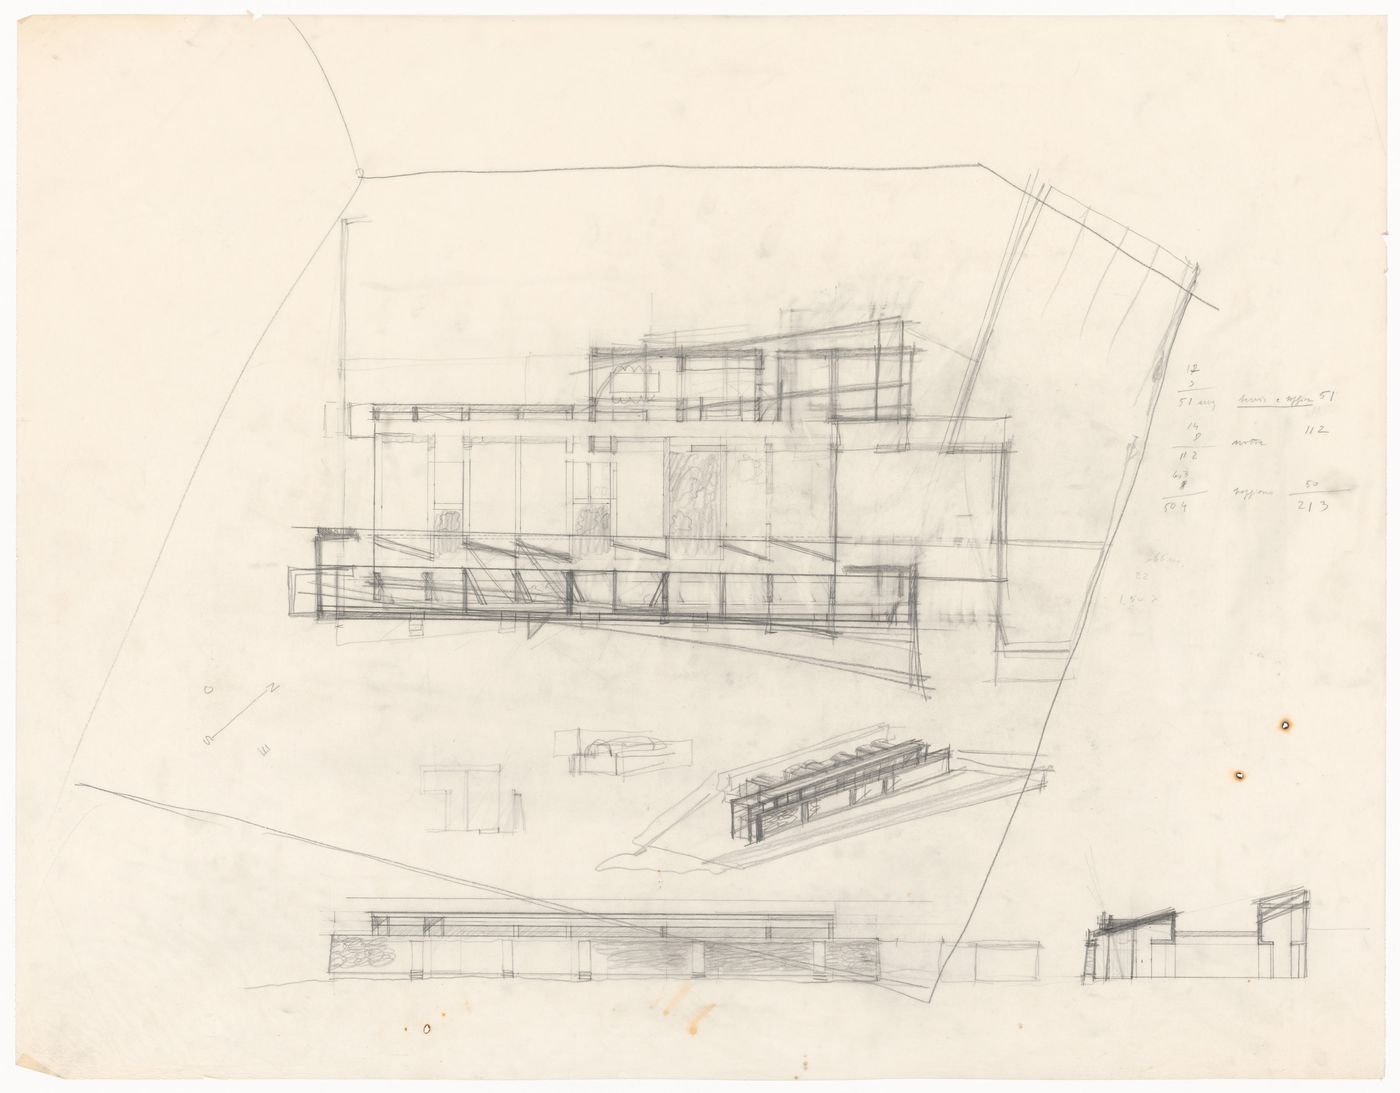 Elevation, plan, and sketches for Casa Tabanelli, Stintino, Italy